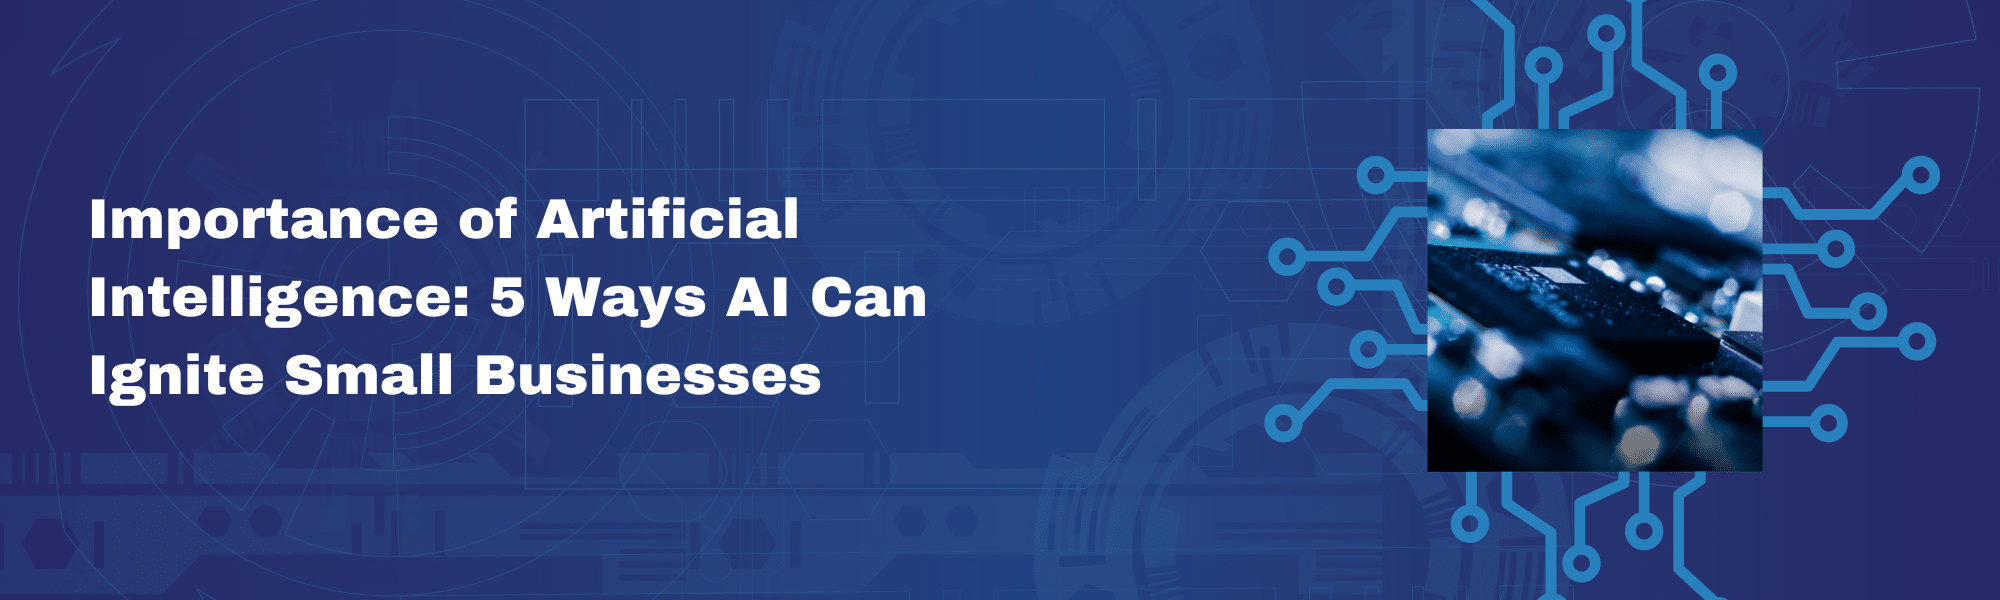 Importance of Artificial Intelligence: 5 Ways AI Can Ignite Small Businesses